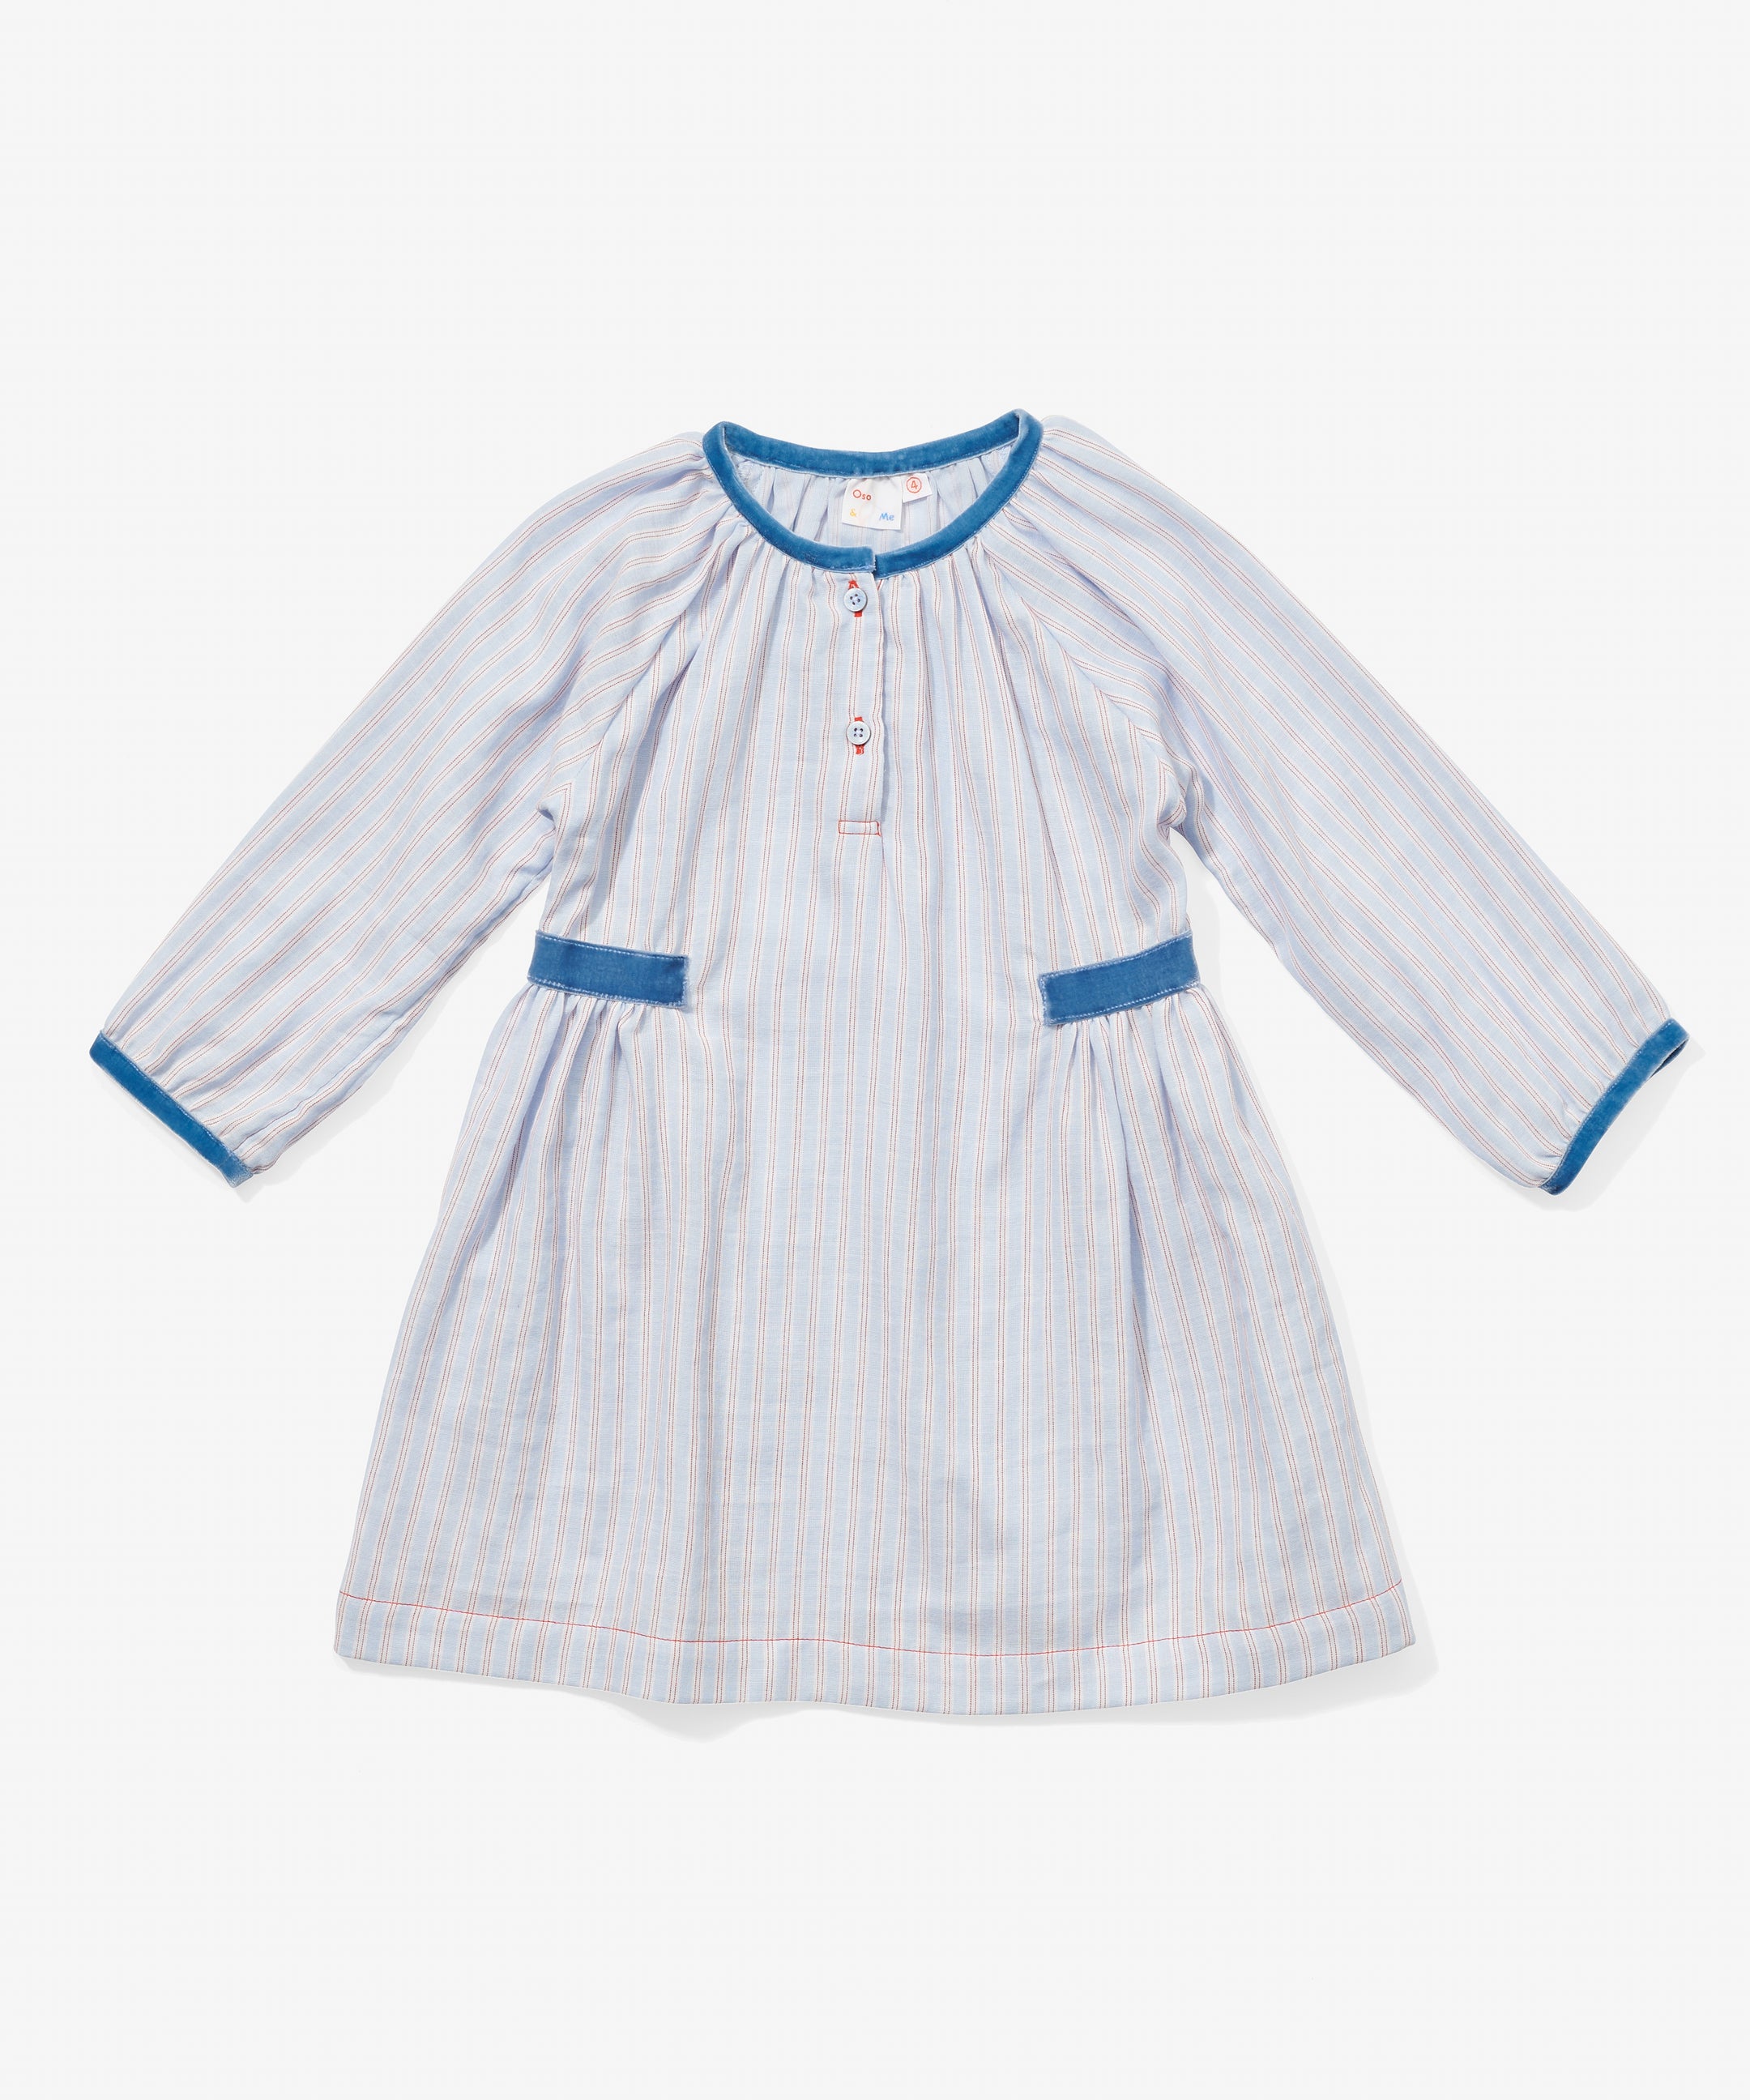 Shop Toddler and Child Girls Dresses | Oso & Me